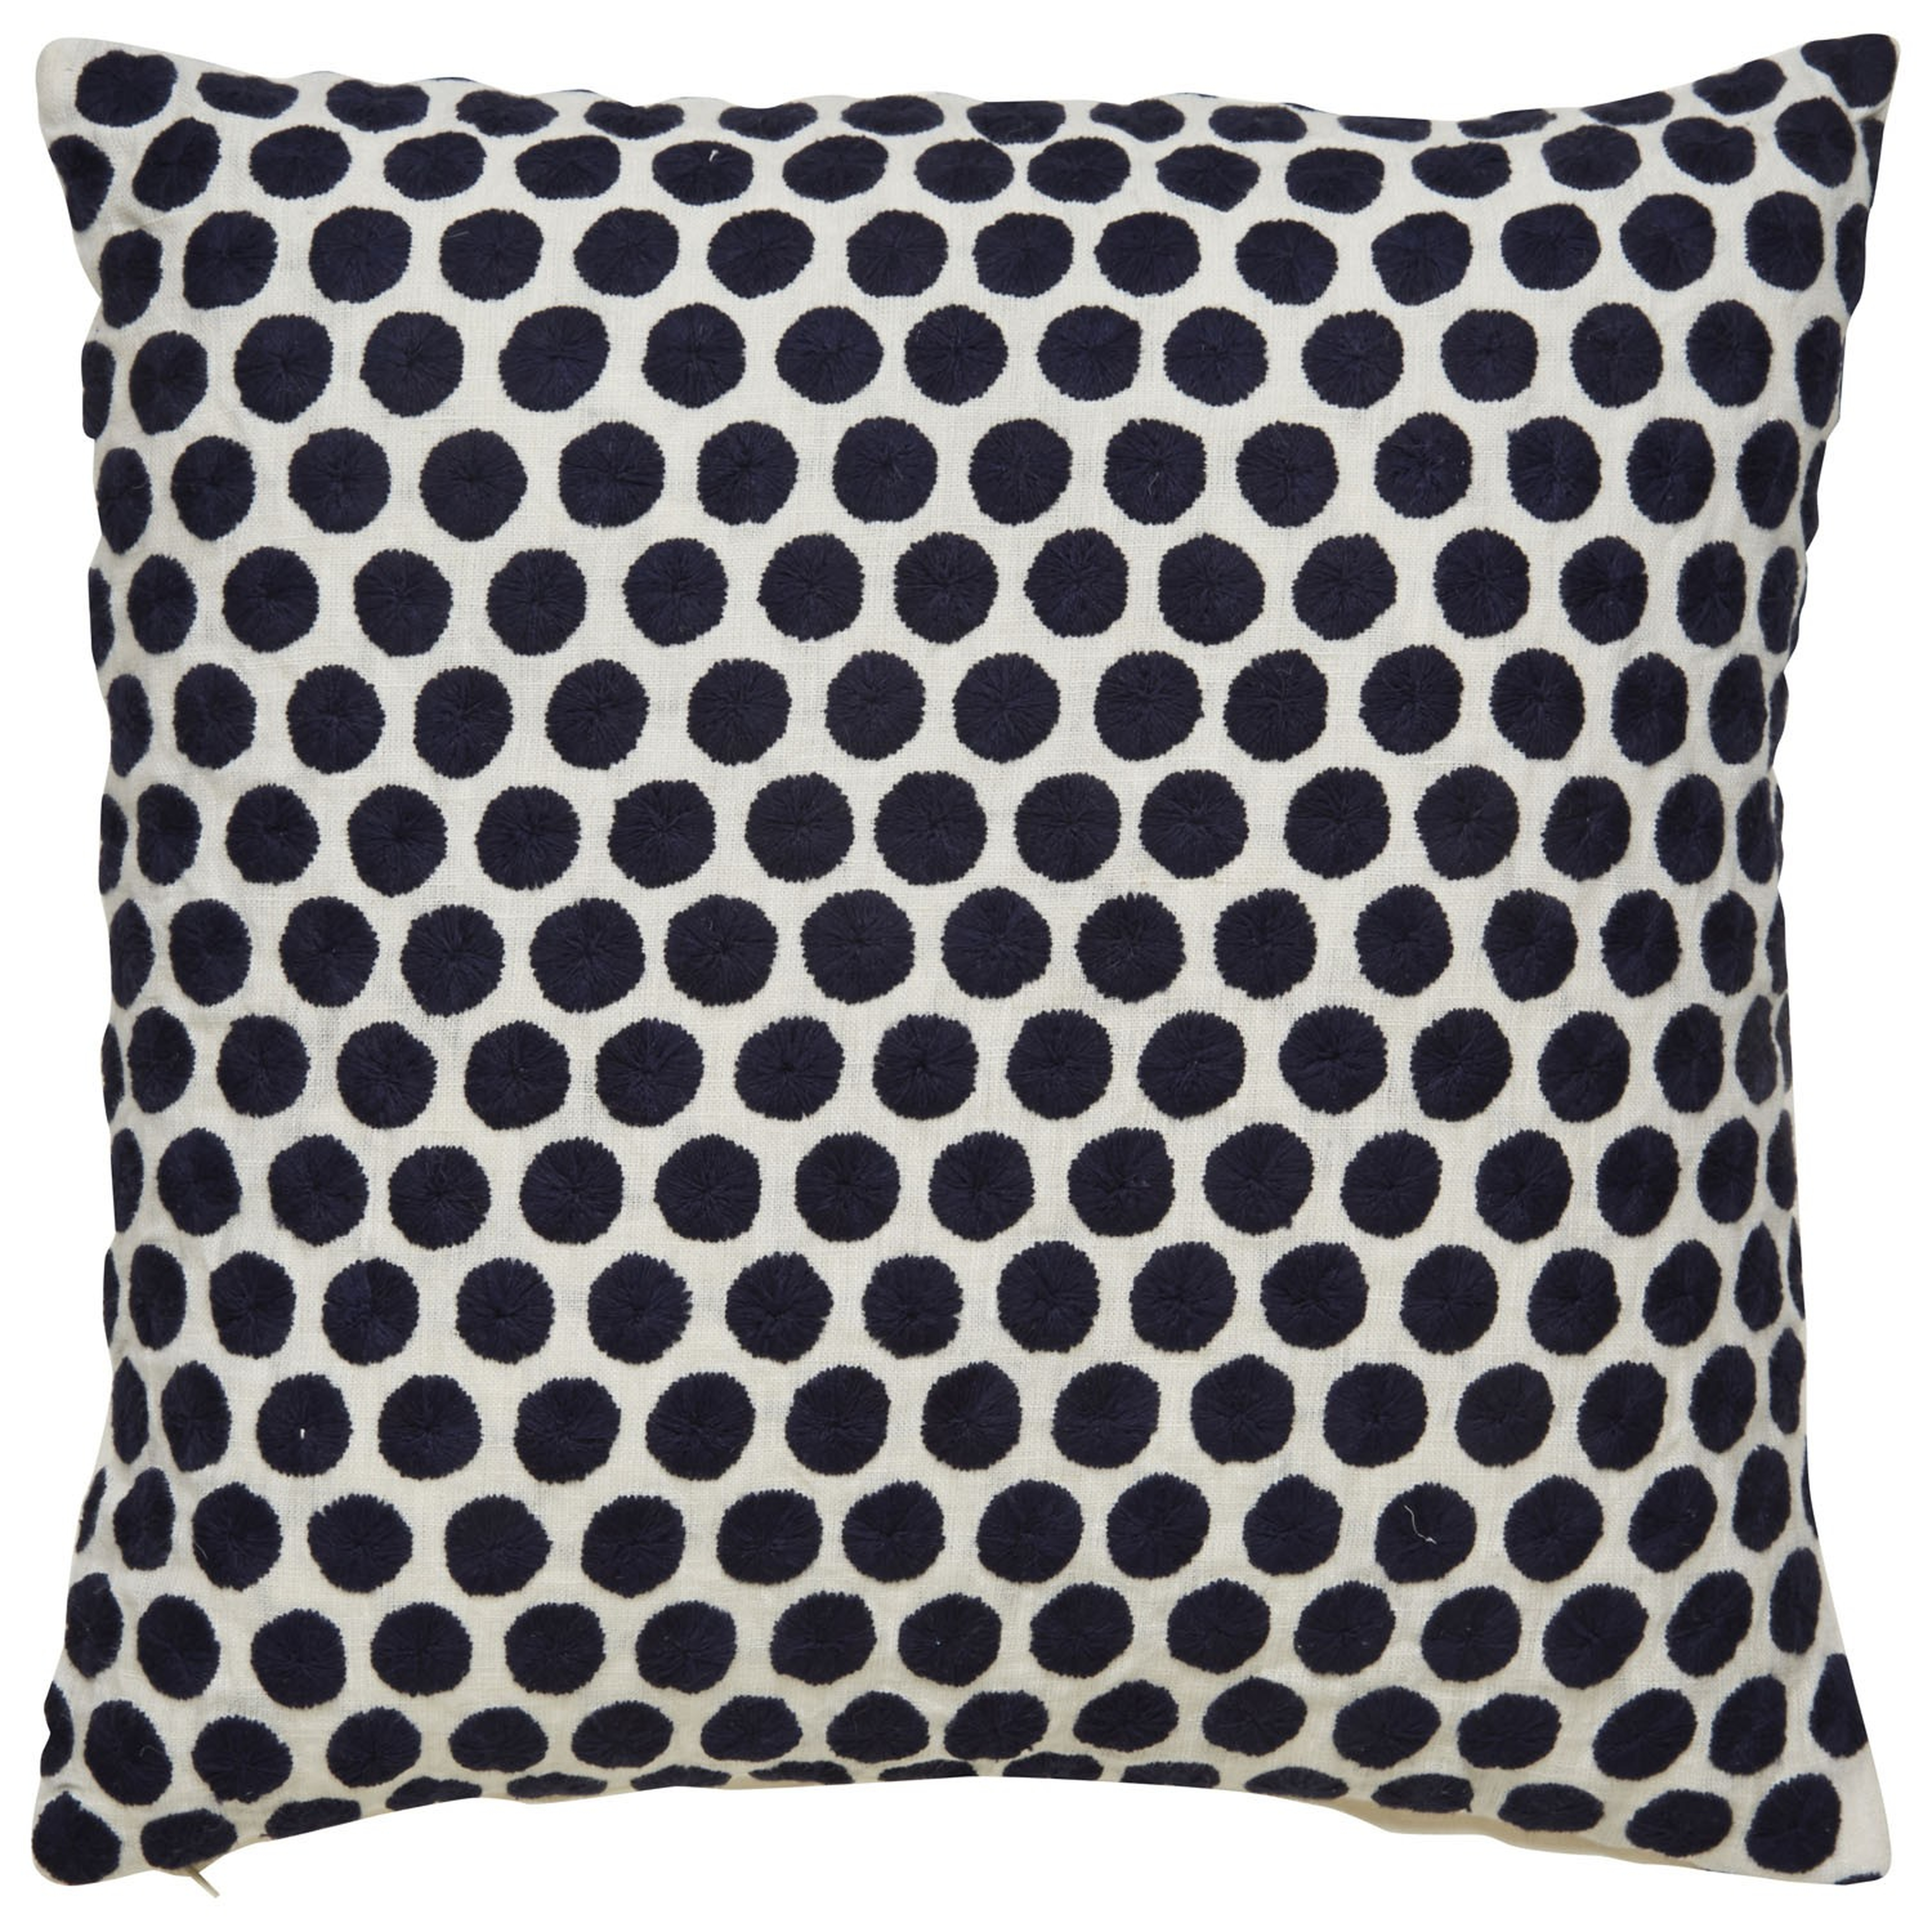 KATE SPADE NEW YORK YORKVILLE EMBROIDERED DOT PILLOW, BLUE - Lulu and Georgia